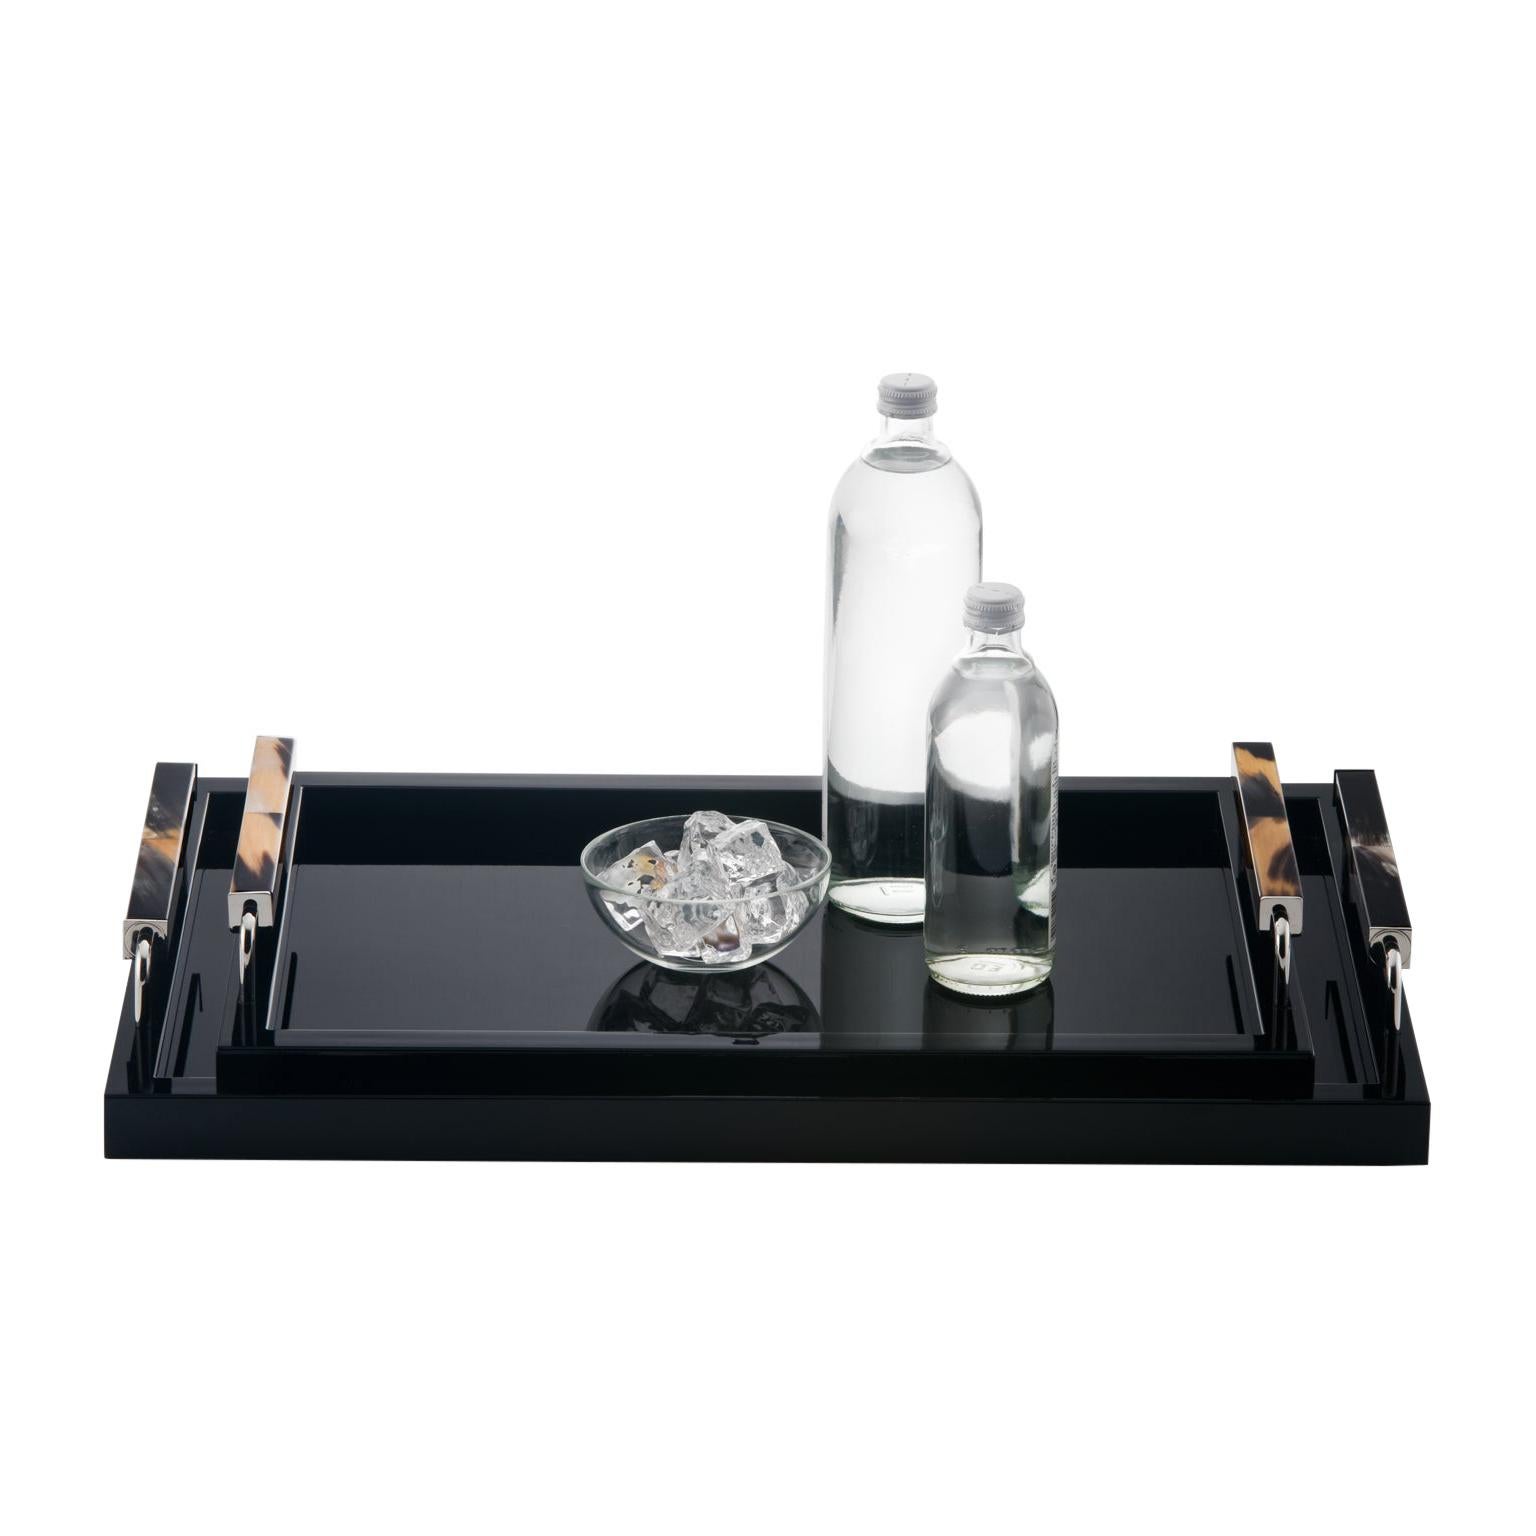 Perfect for serving drinks and hors d'oeuvres or for displaying fine glassware, our Isacco tray features a clean rectangular silhouette crafted of wood, with a high shine black lacquer finish. The design is added an artistic edge by the elegant